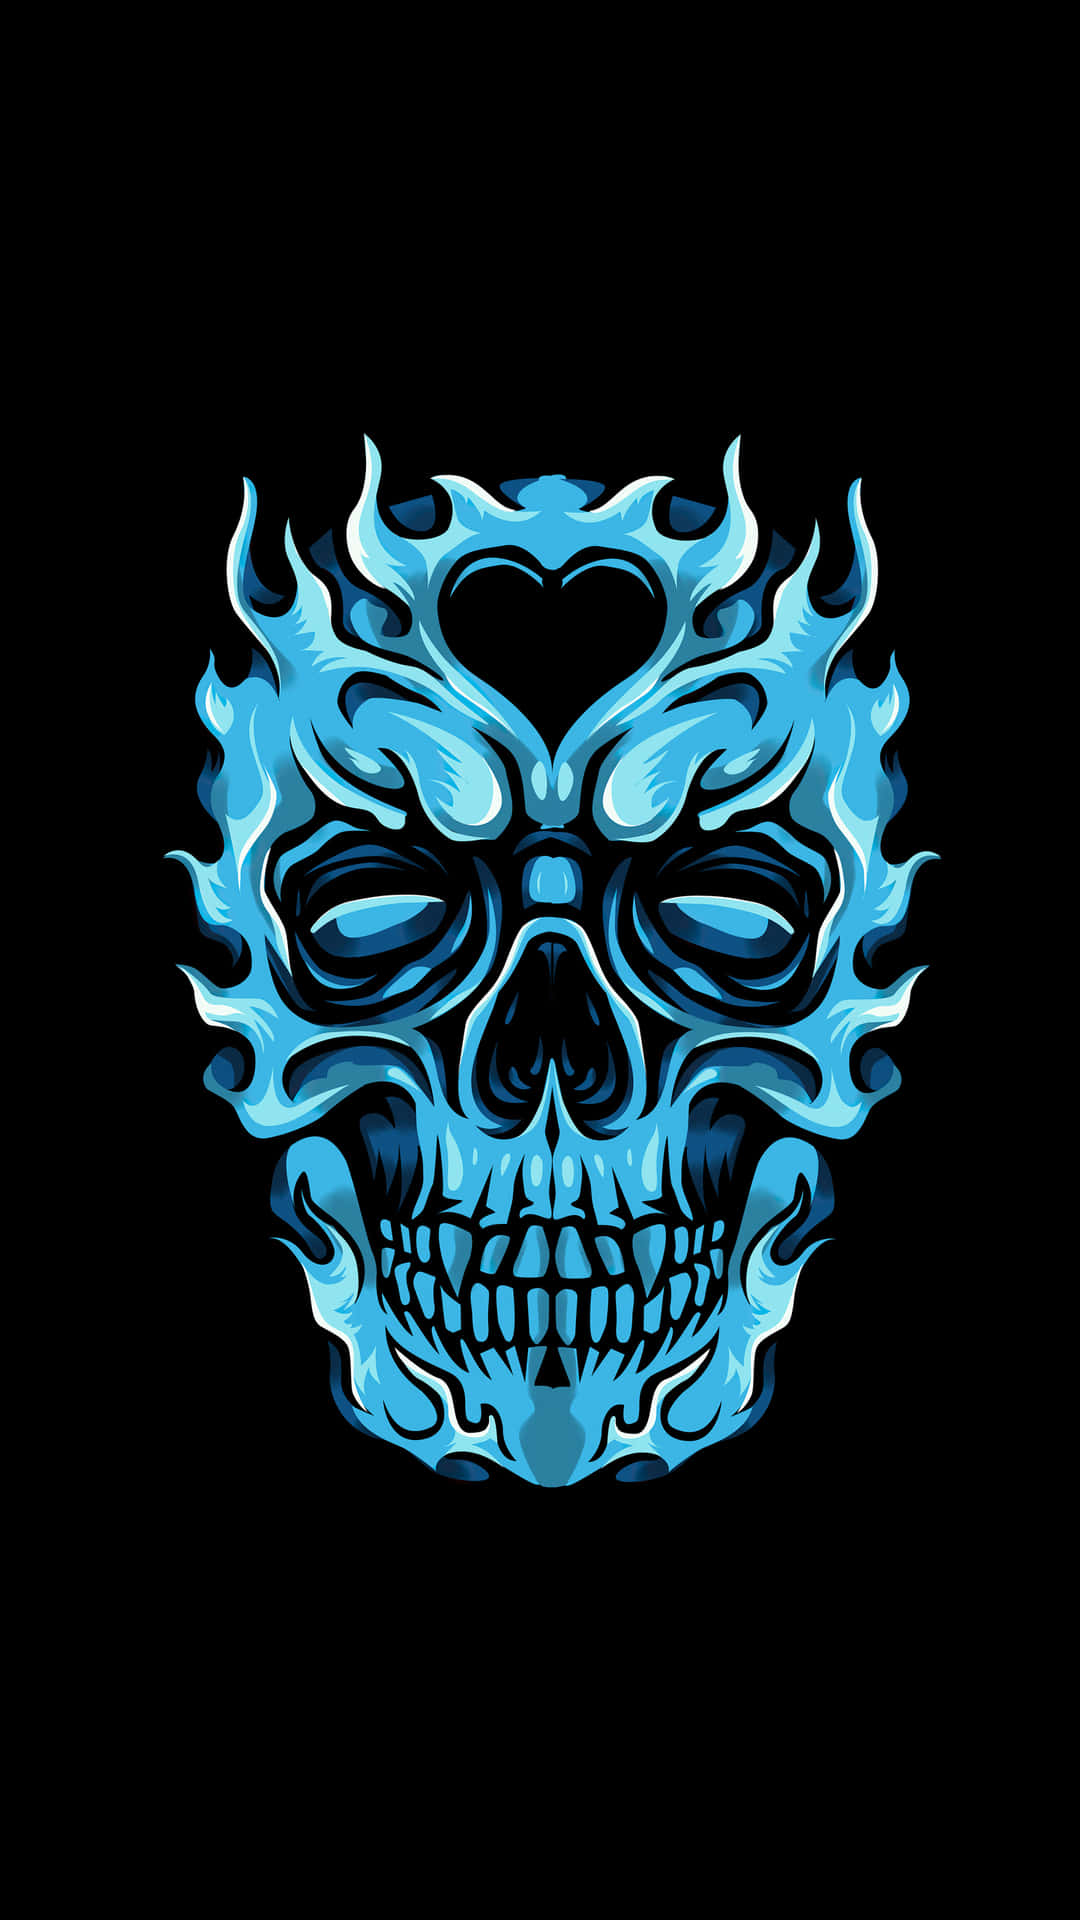 Skull Wallpaper For IPhone (67+ images)